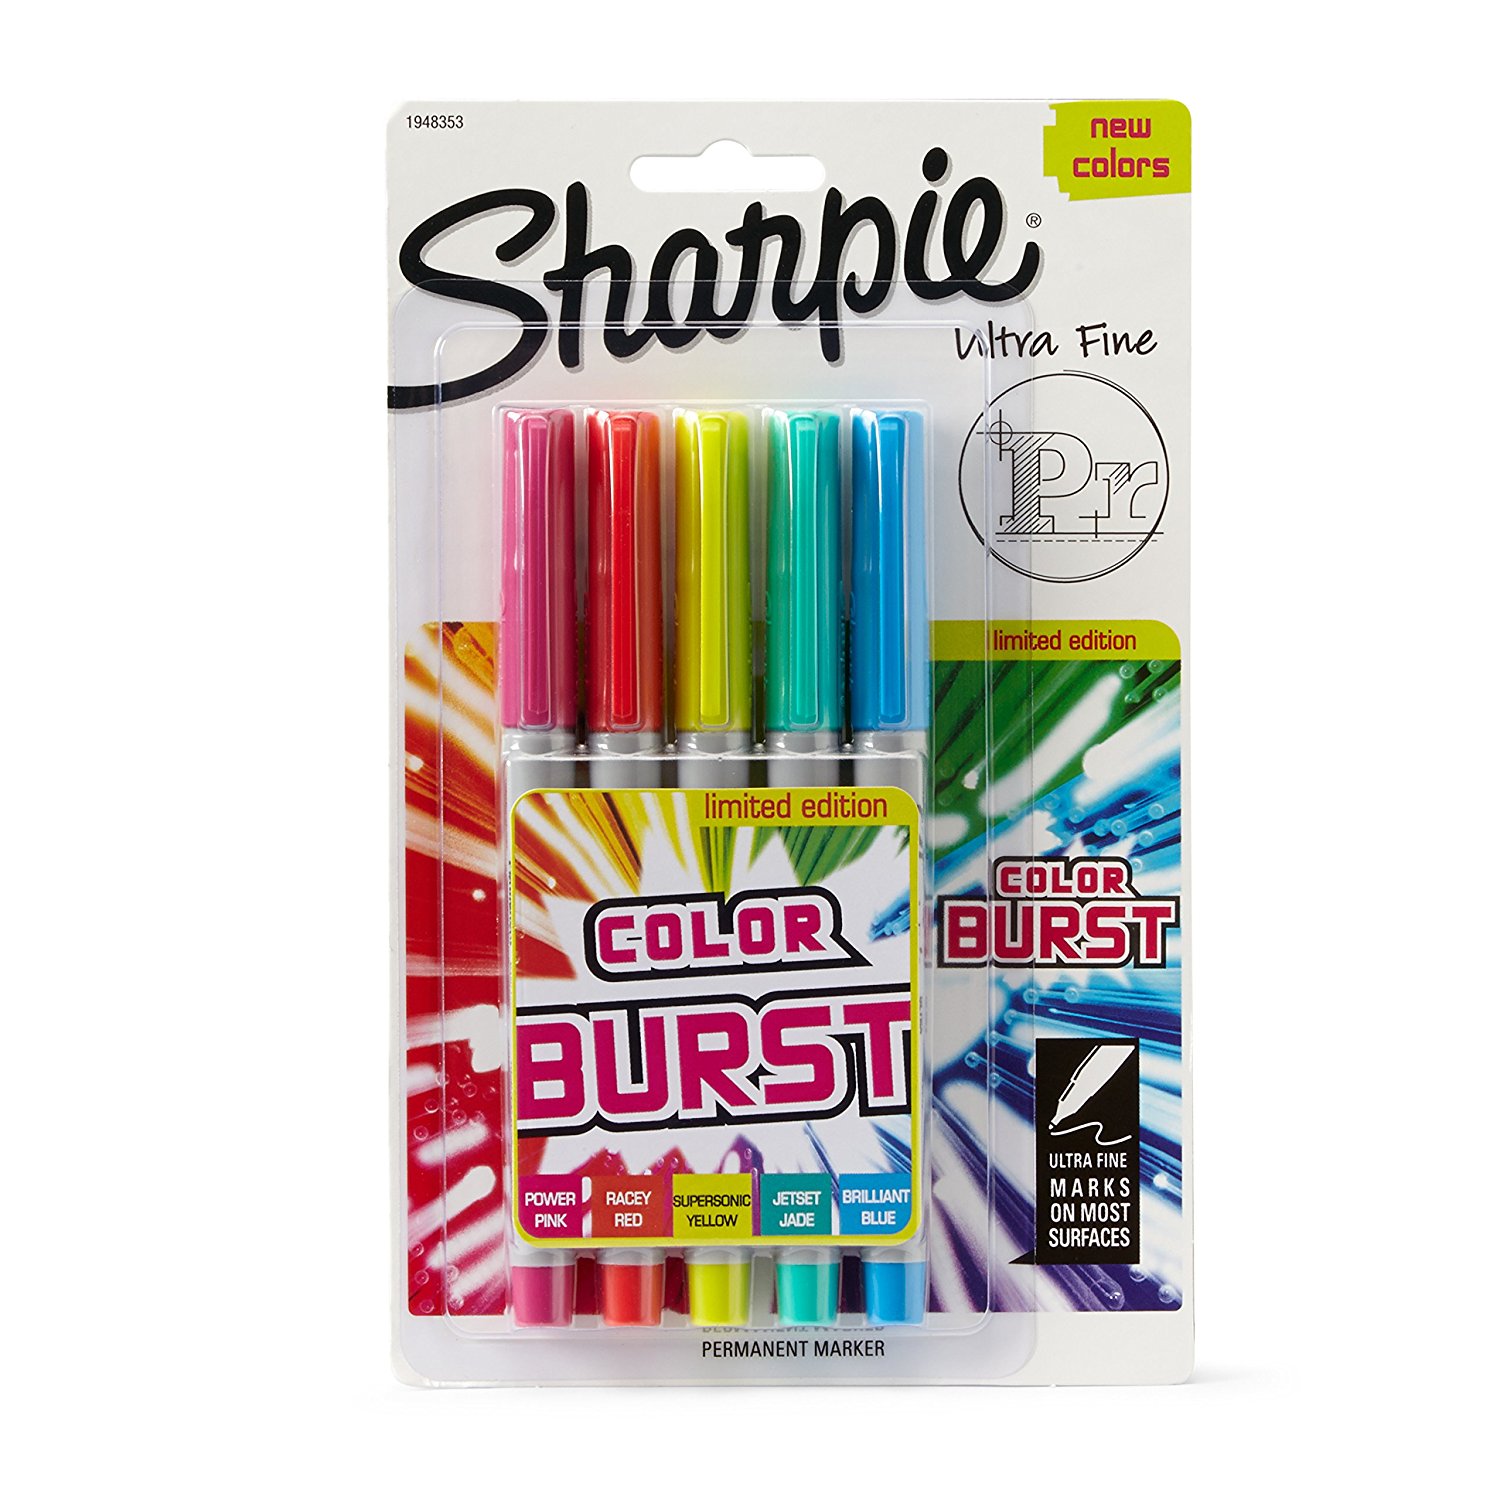 Sharpie Color Burst Permanent Markers 5-Pack – Just $3.97! Back in stock!